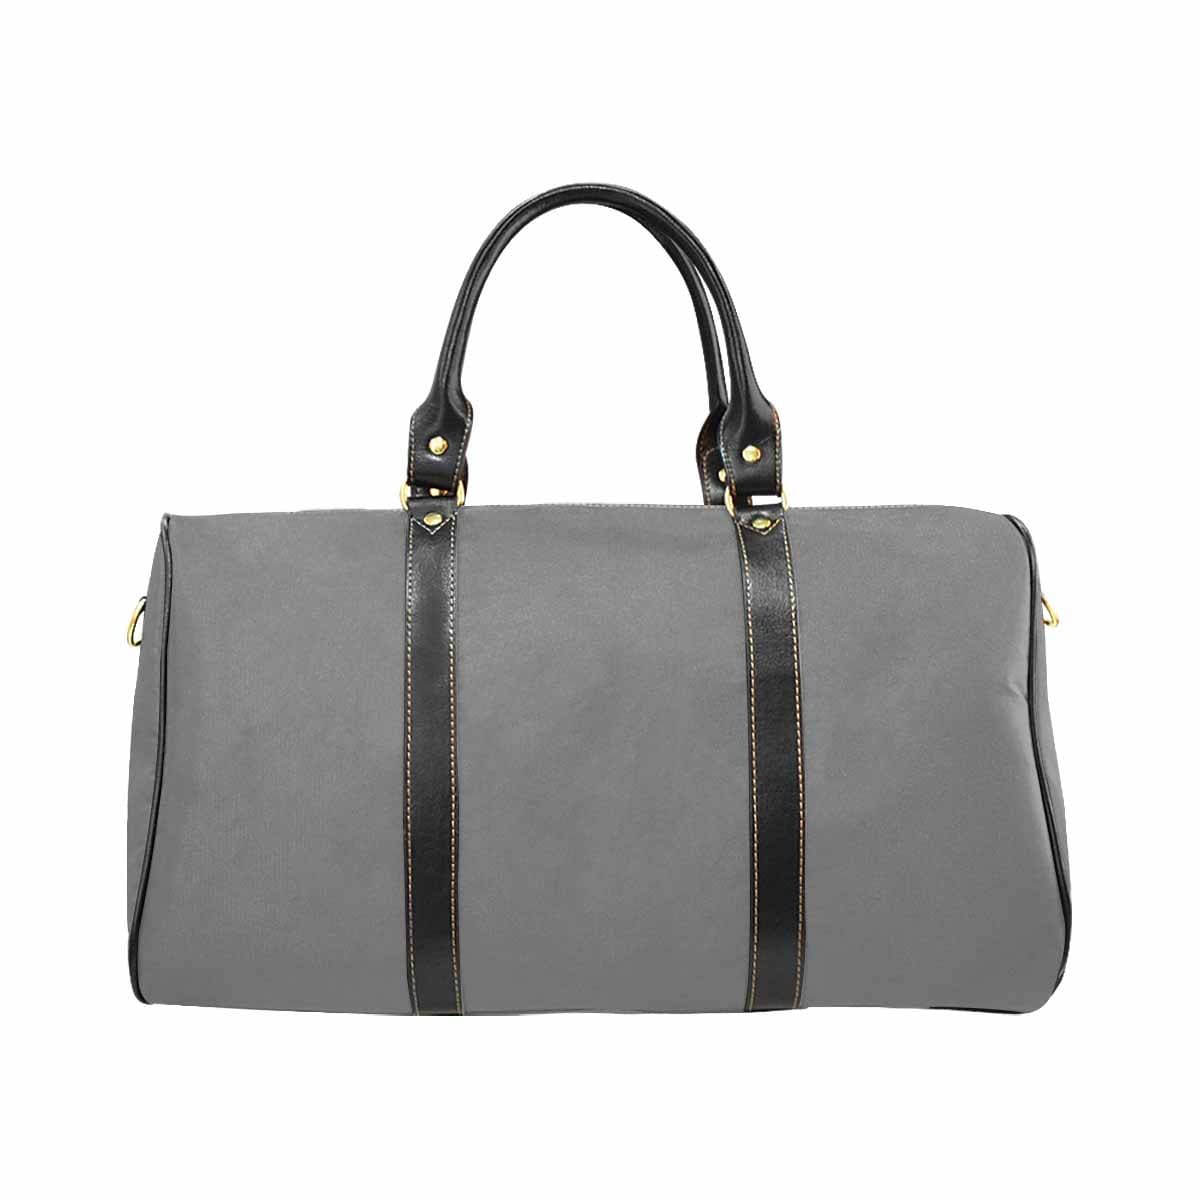 Travel Bag Leather Carry On Large Luggage Bag Gray - Bags | Travel Bags |